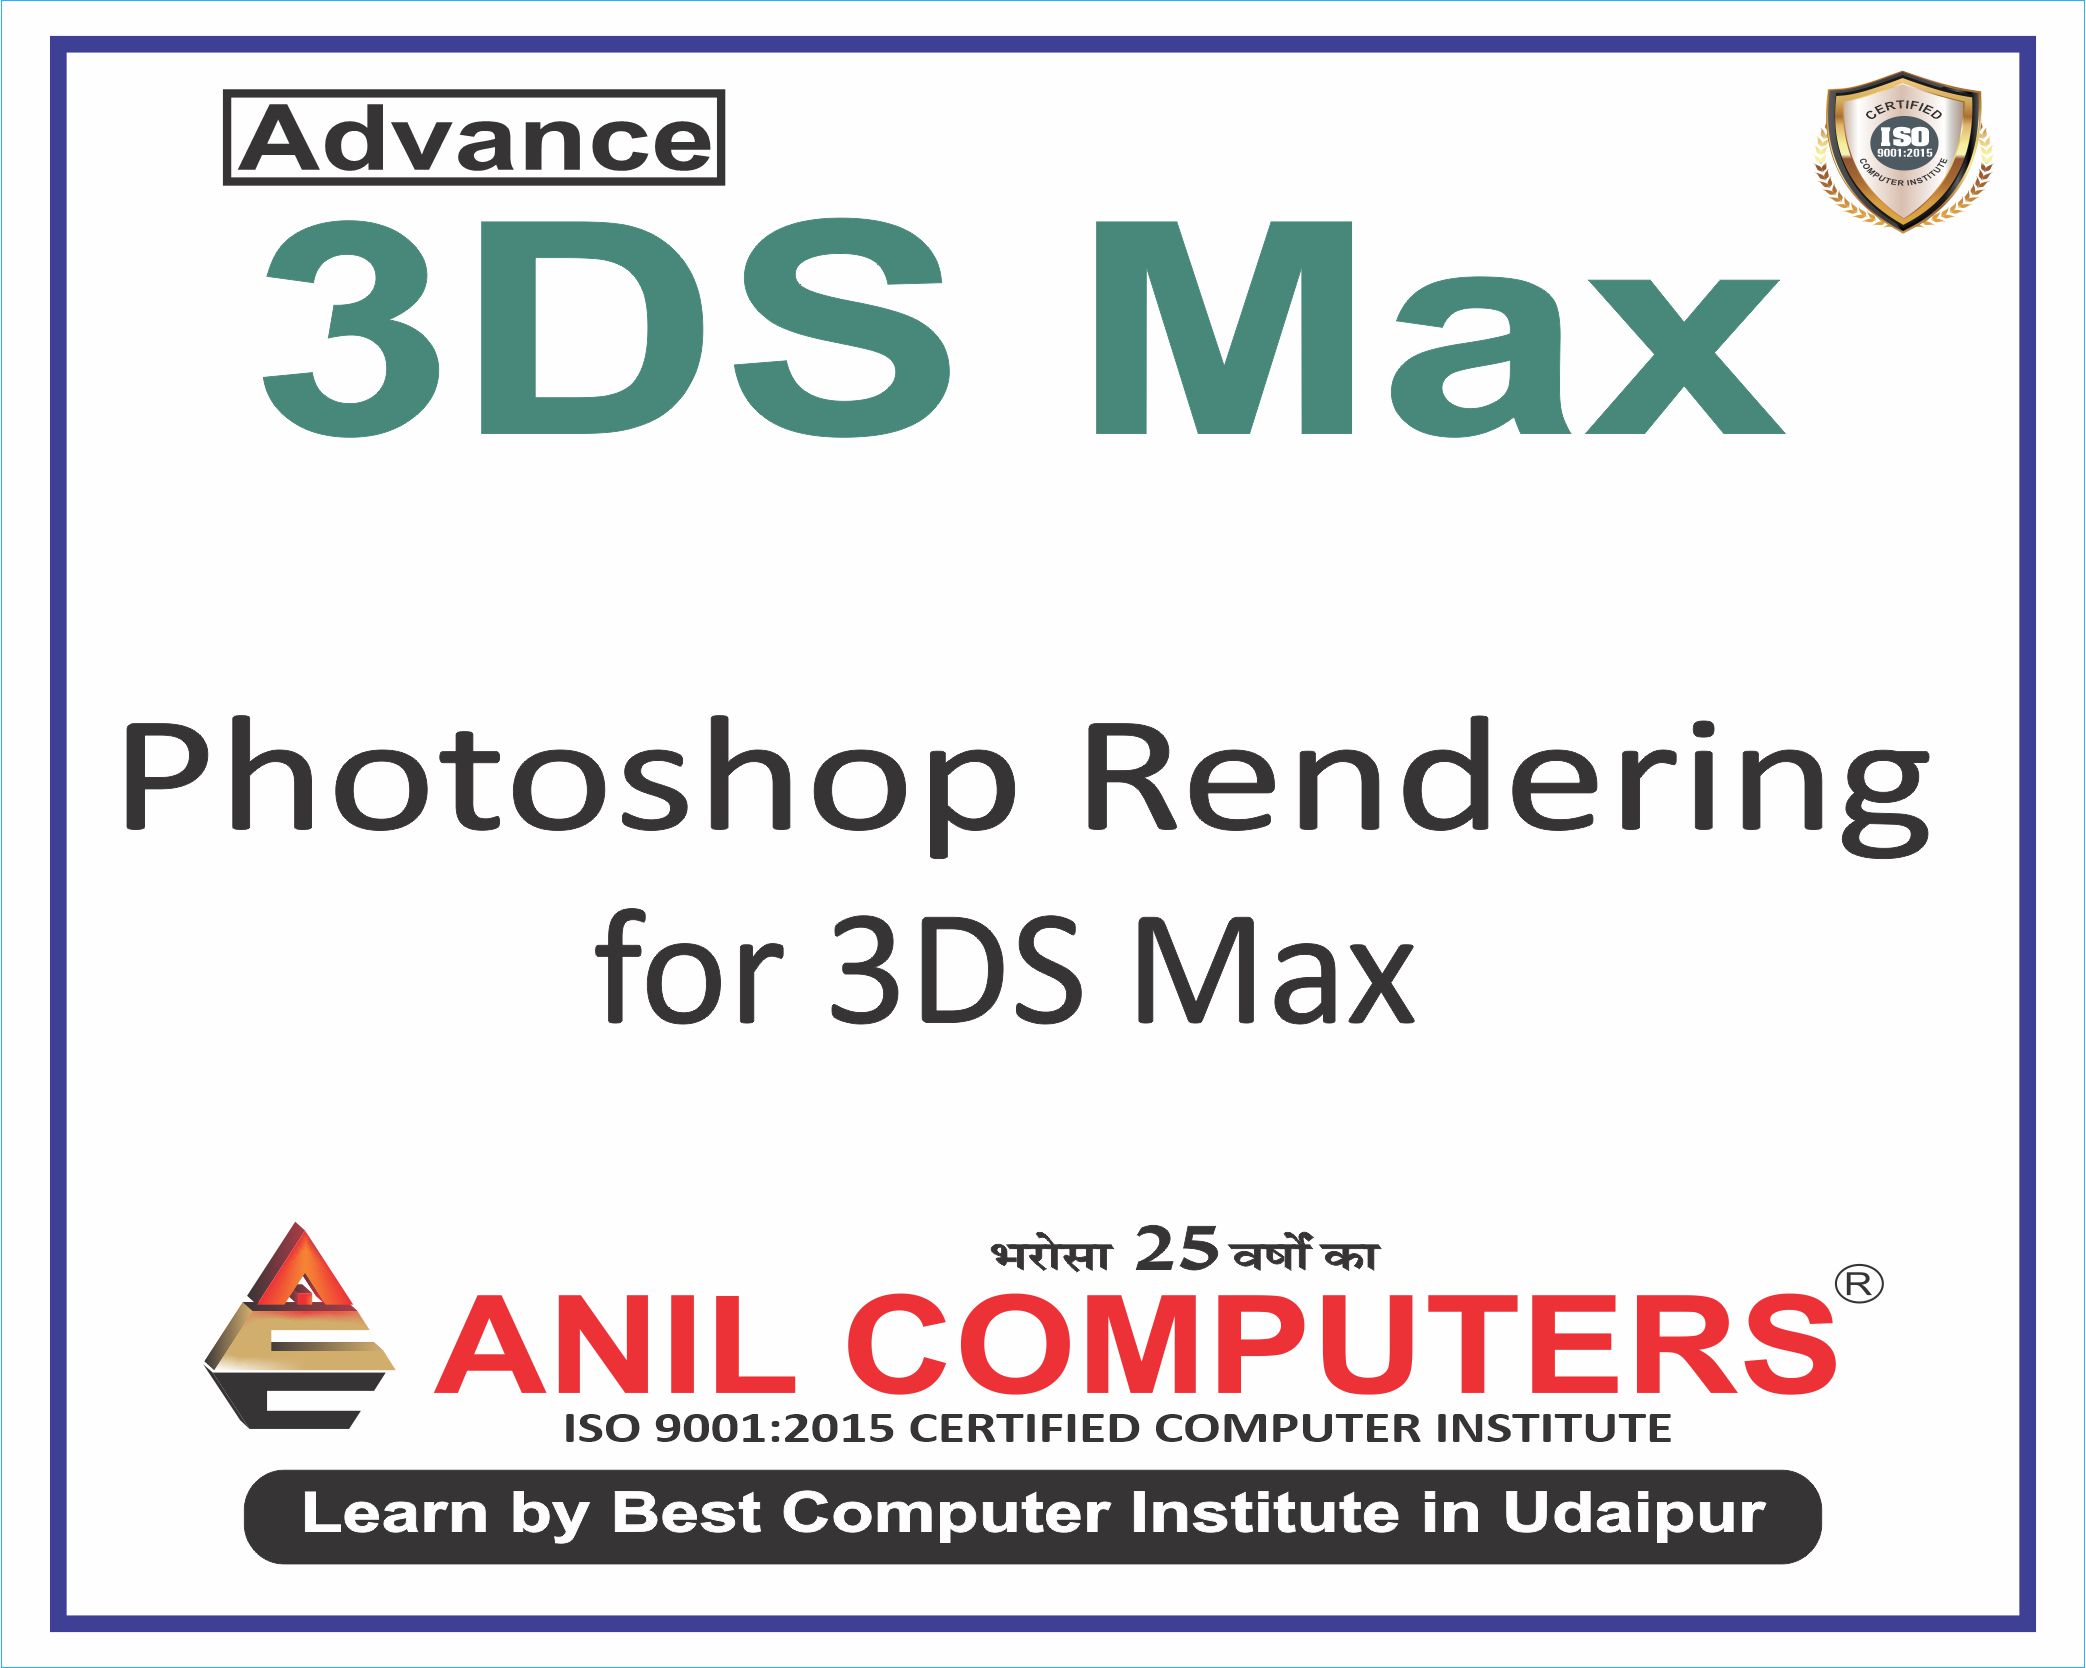 Photoshop Rendering for 3DS Max